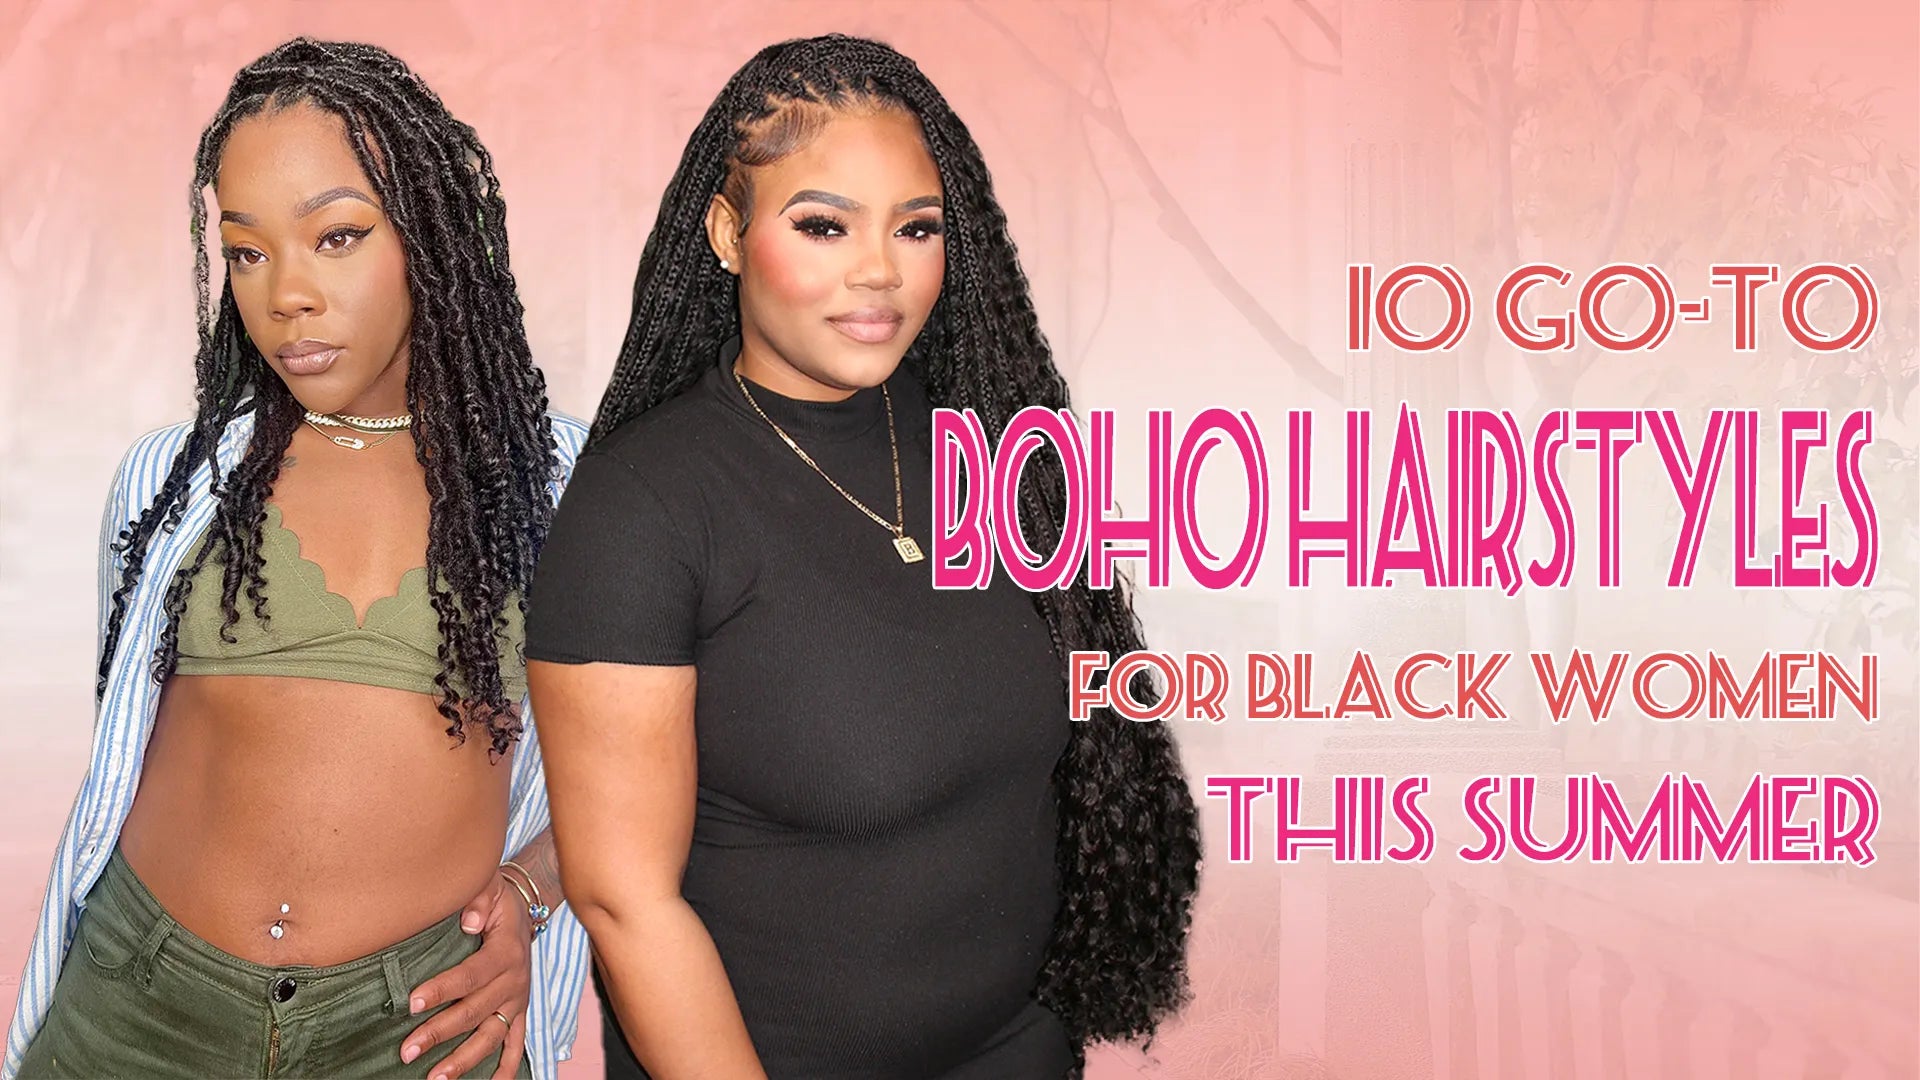 10 Go-To Boho Hairstyles for Black Women This Summer